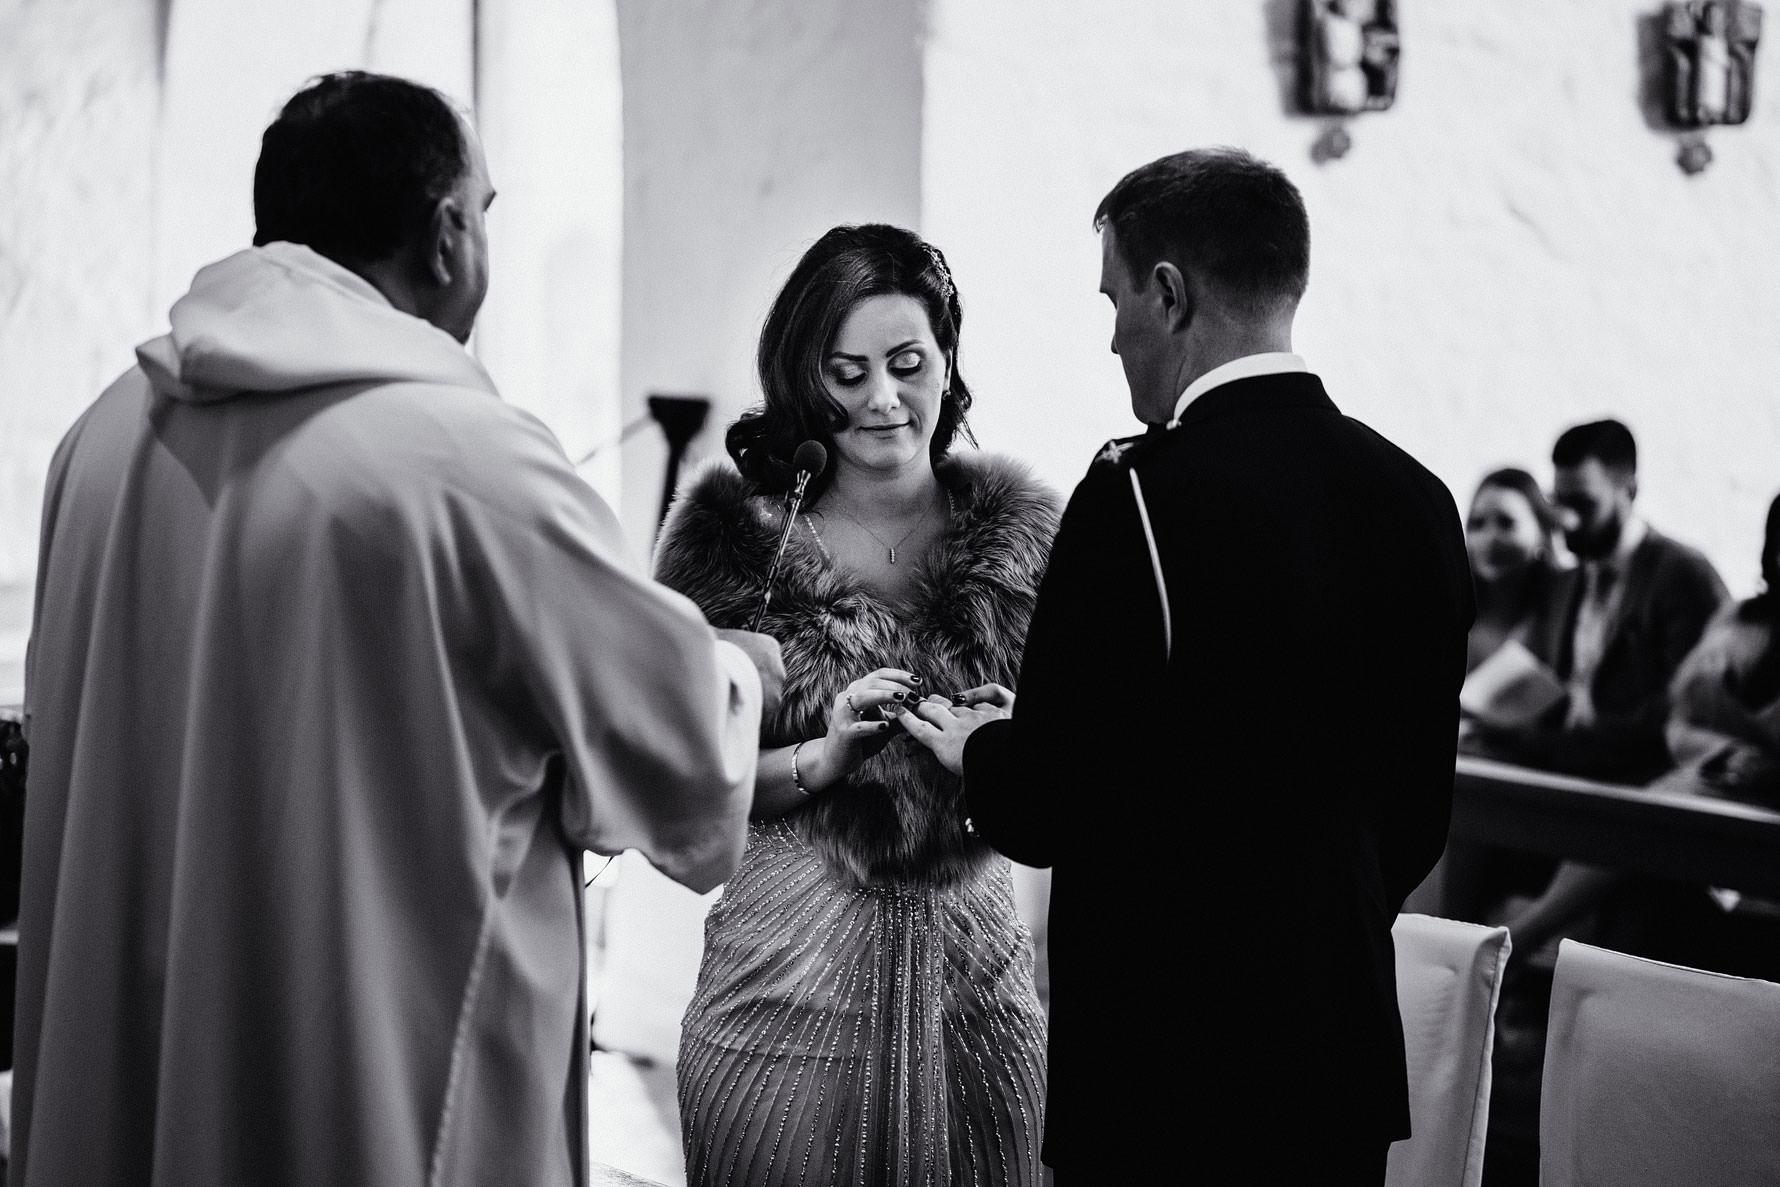 the ring exchange at a wedding